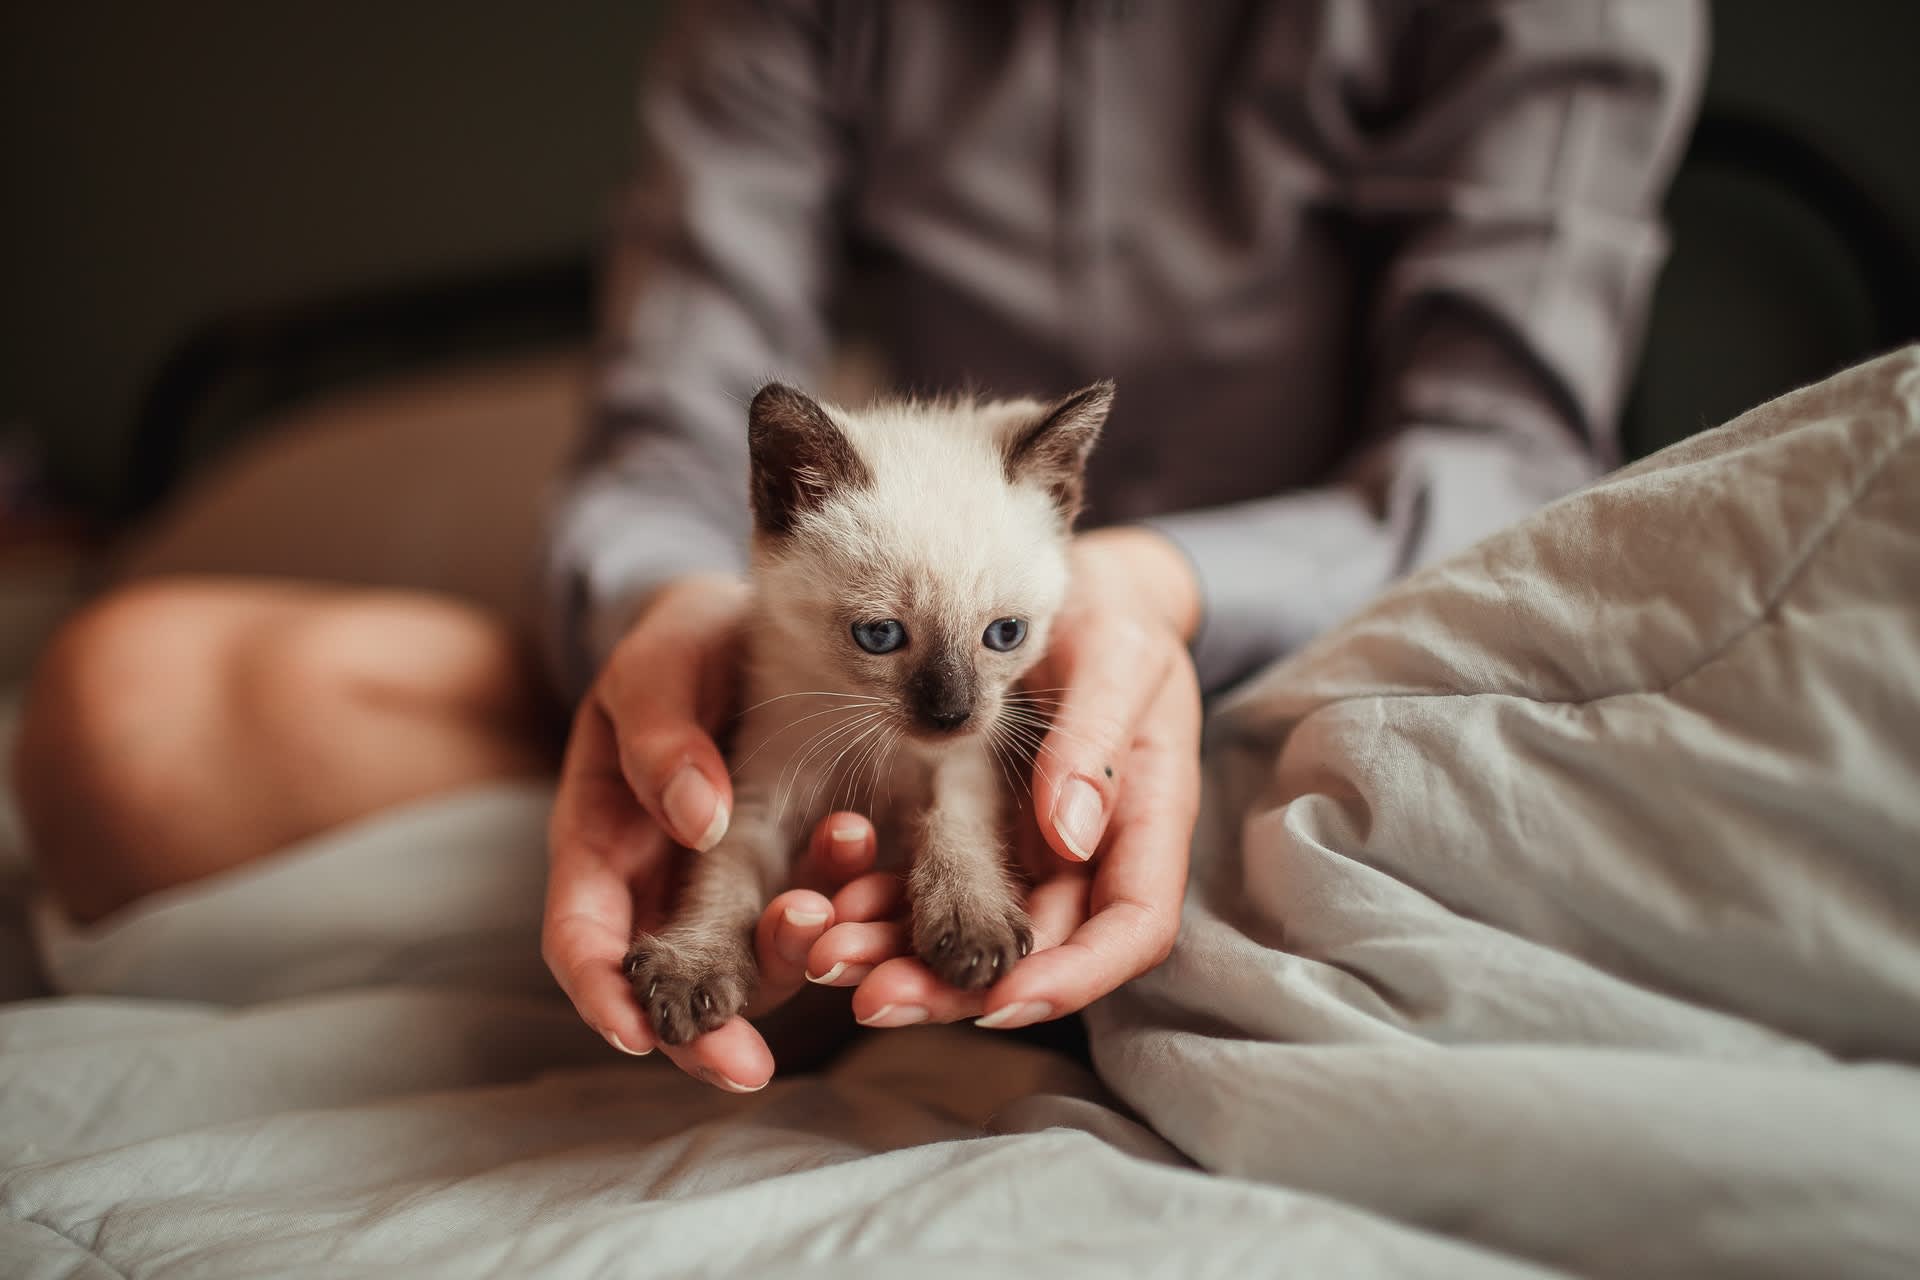 What To Do When Your New Kitten Won't Stop Meowing